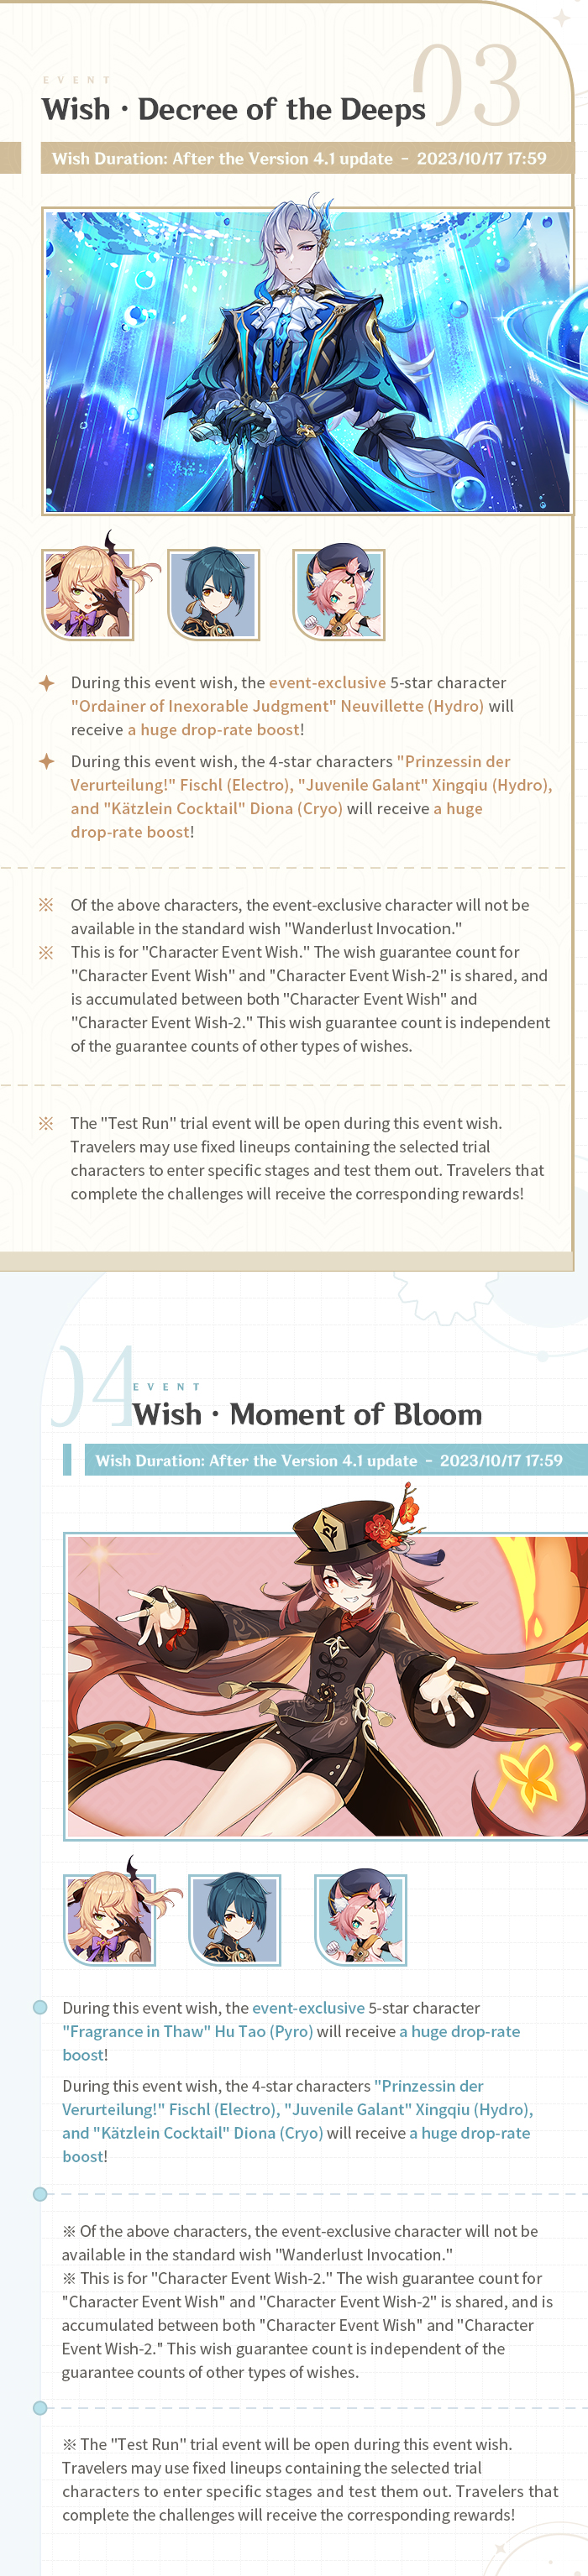 Version 4.1 Event Wishes Notice - Phase I